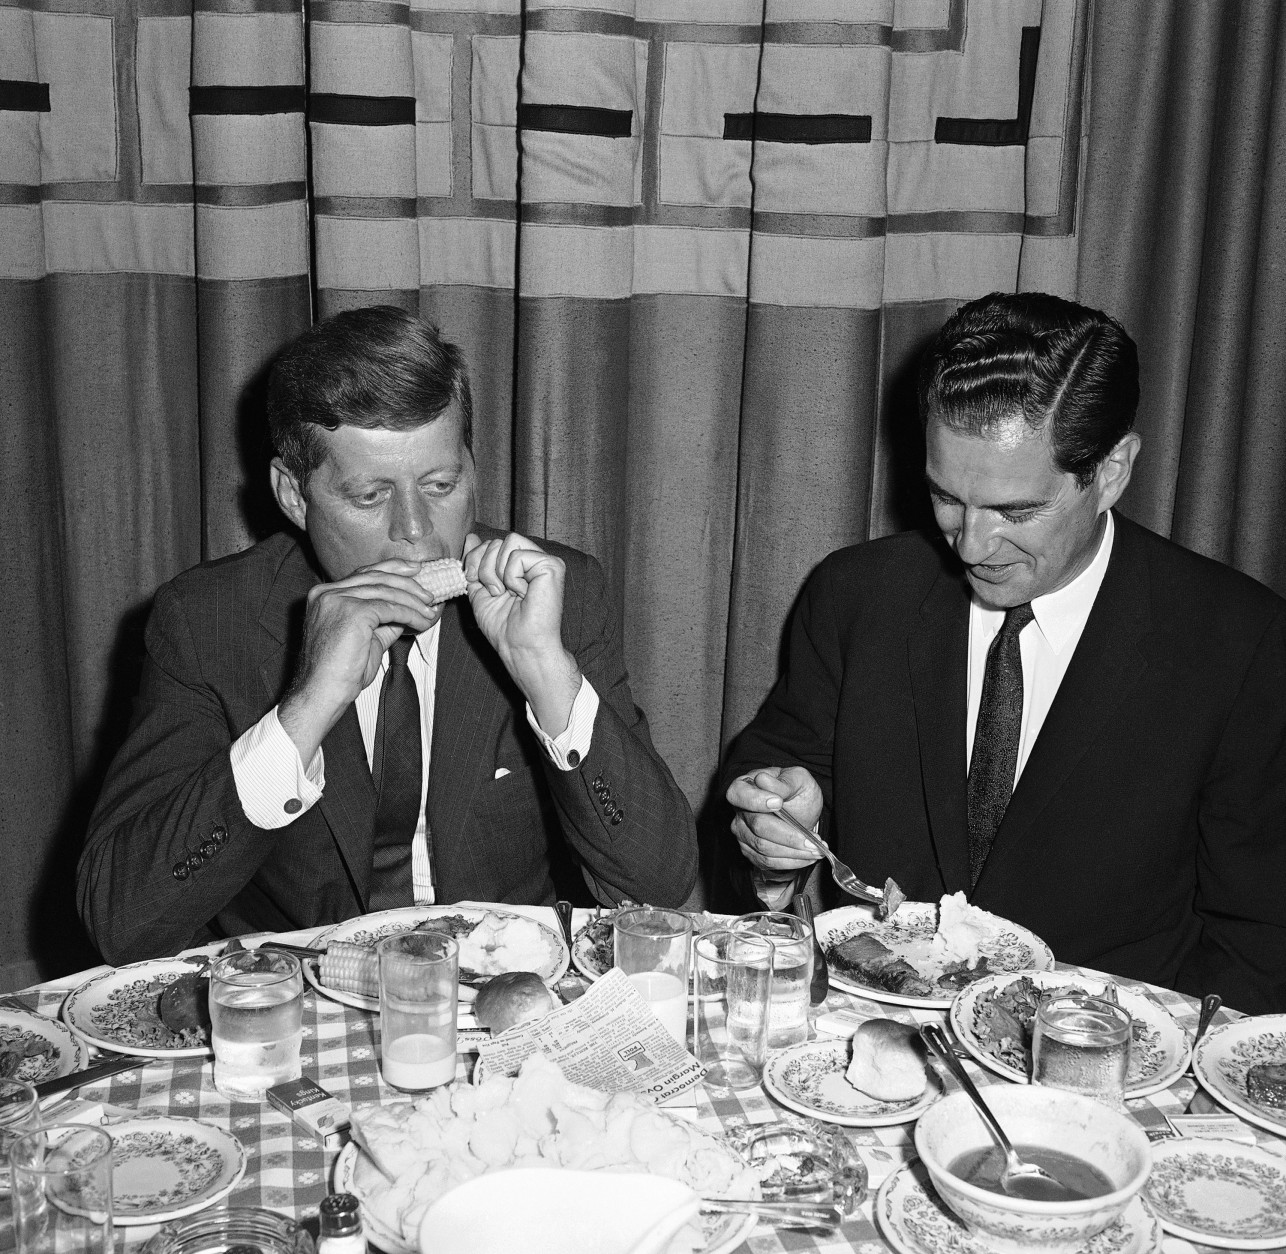 U.S. Sen. John Kennedy, the Democratic presidential nominee, bites into some Iowa sweet corn at a home-style dinner in Des Moines, August 21, 1960 in Illinois. He and his running mate, Sen. Lyndon Johnson were in this city of the farm belt to tell how they would improve the agriculture situation. (AP Photo)